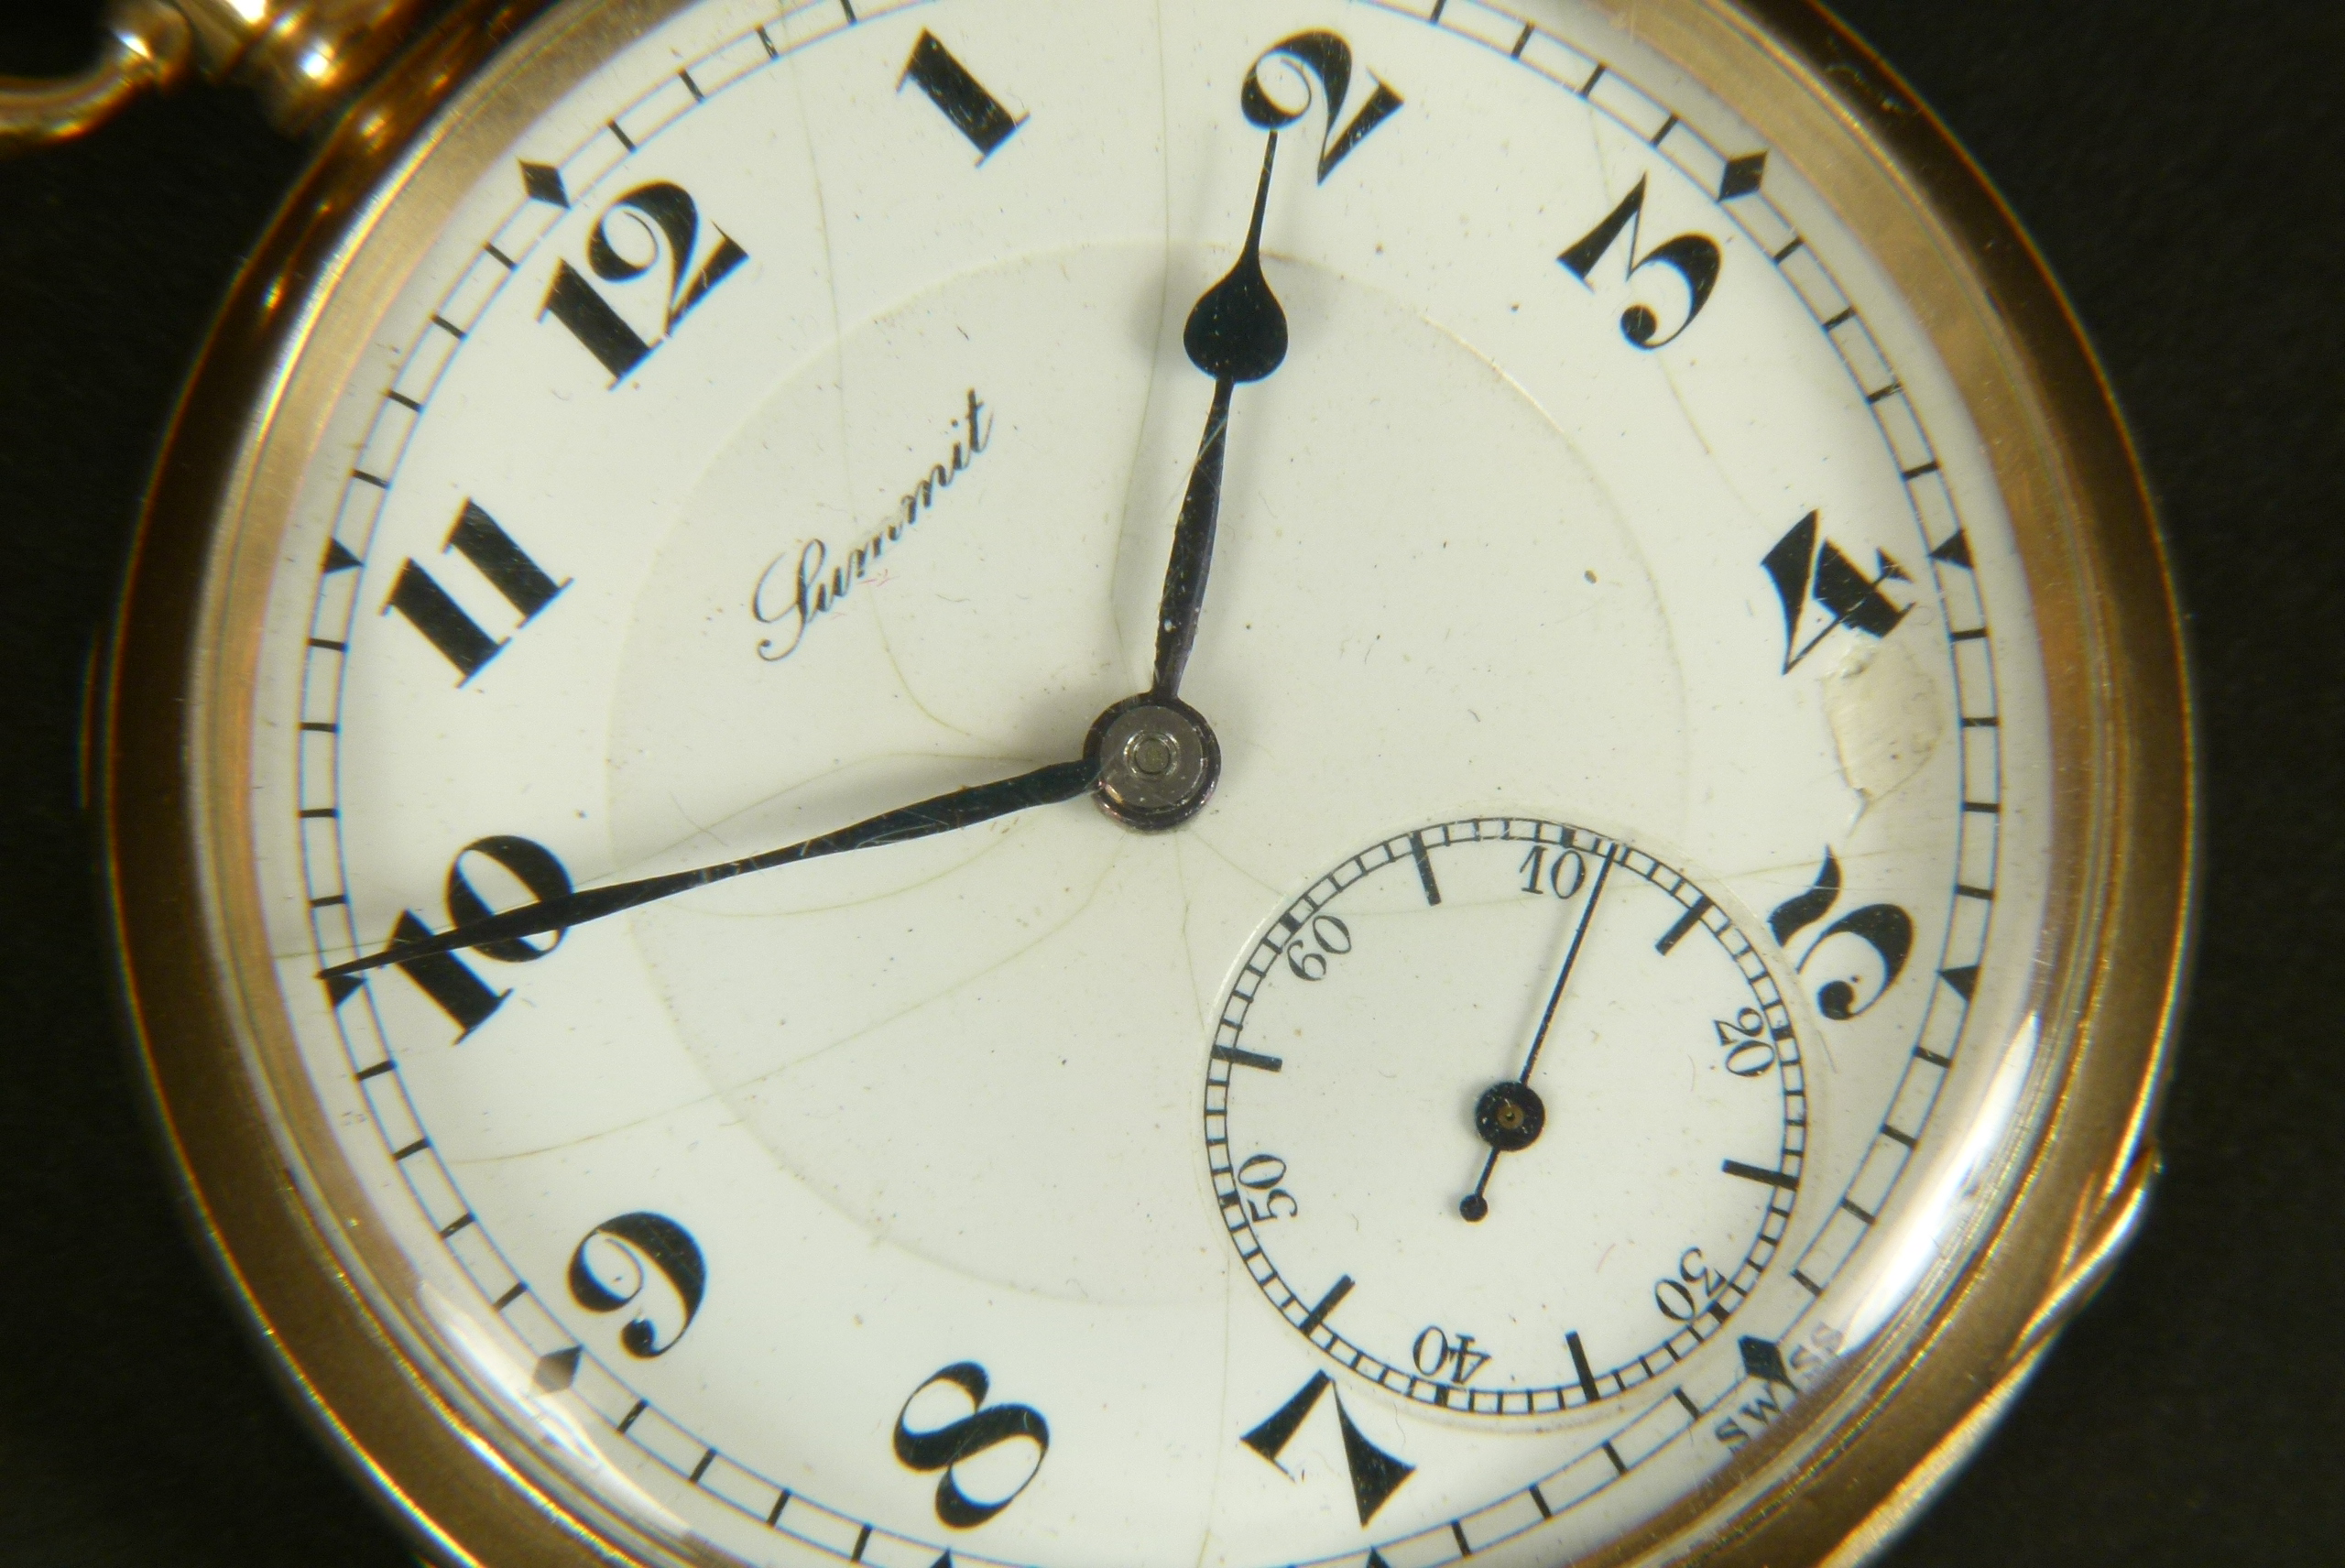 A George V open faced pocket watch by Summit in 9ct gold, case No 255 707, keyless 17 jewelled lever - Image 2 of 4